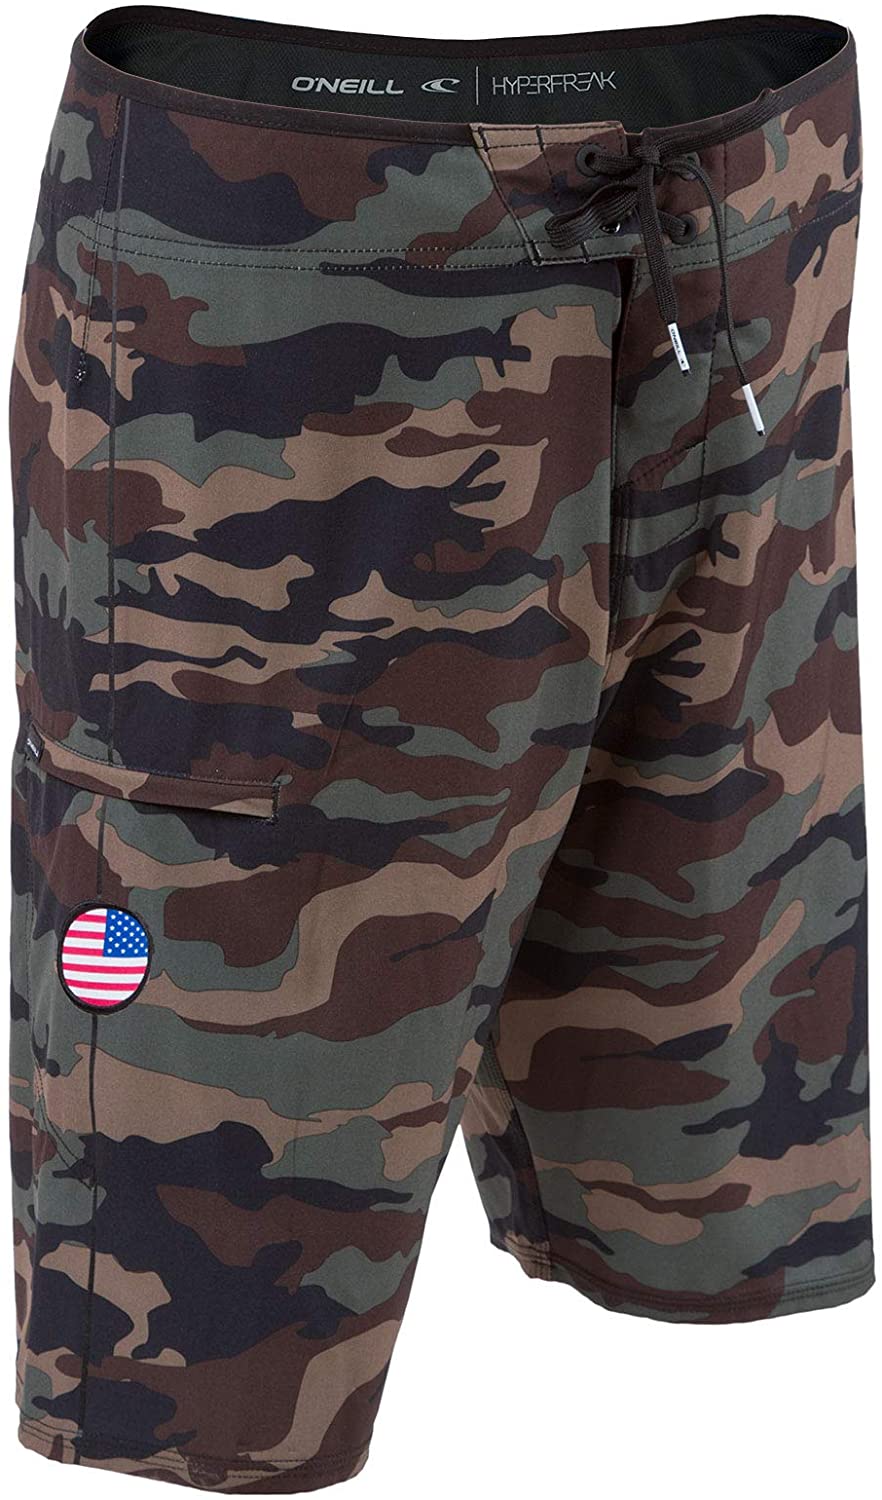 ONeill GI Jack Patriotic Hyperfreak Boardshorts With American Flag Patch 